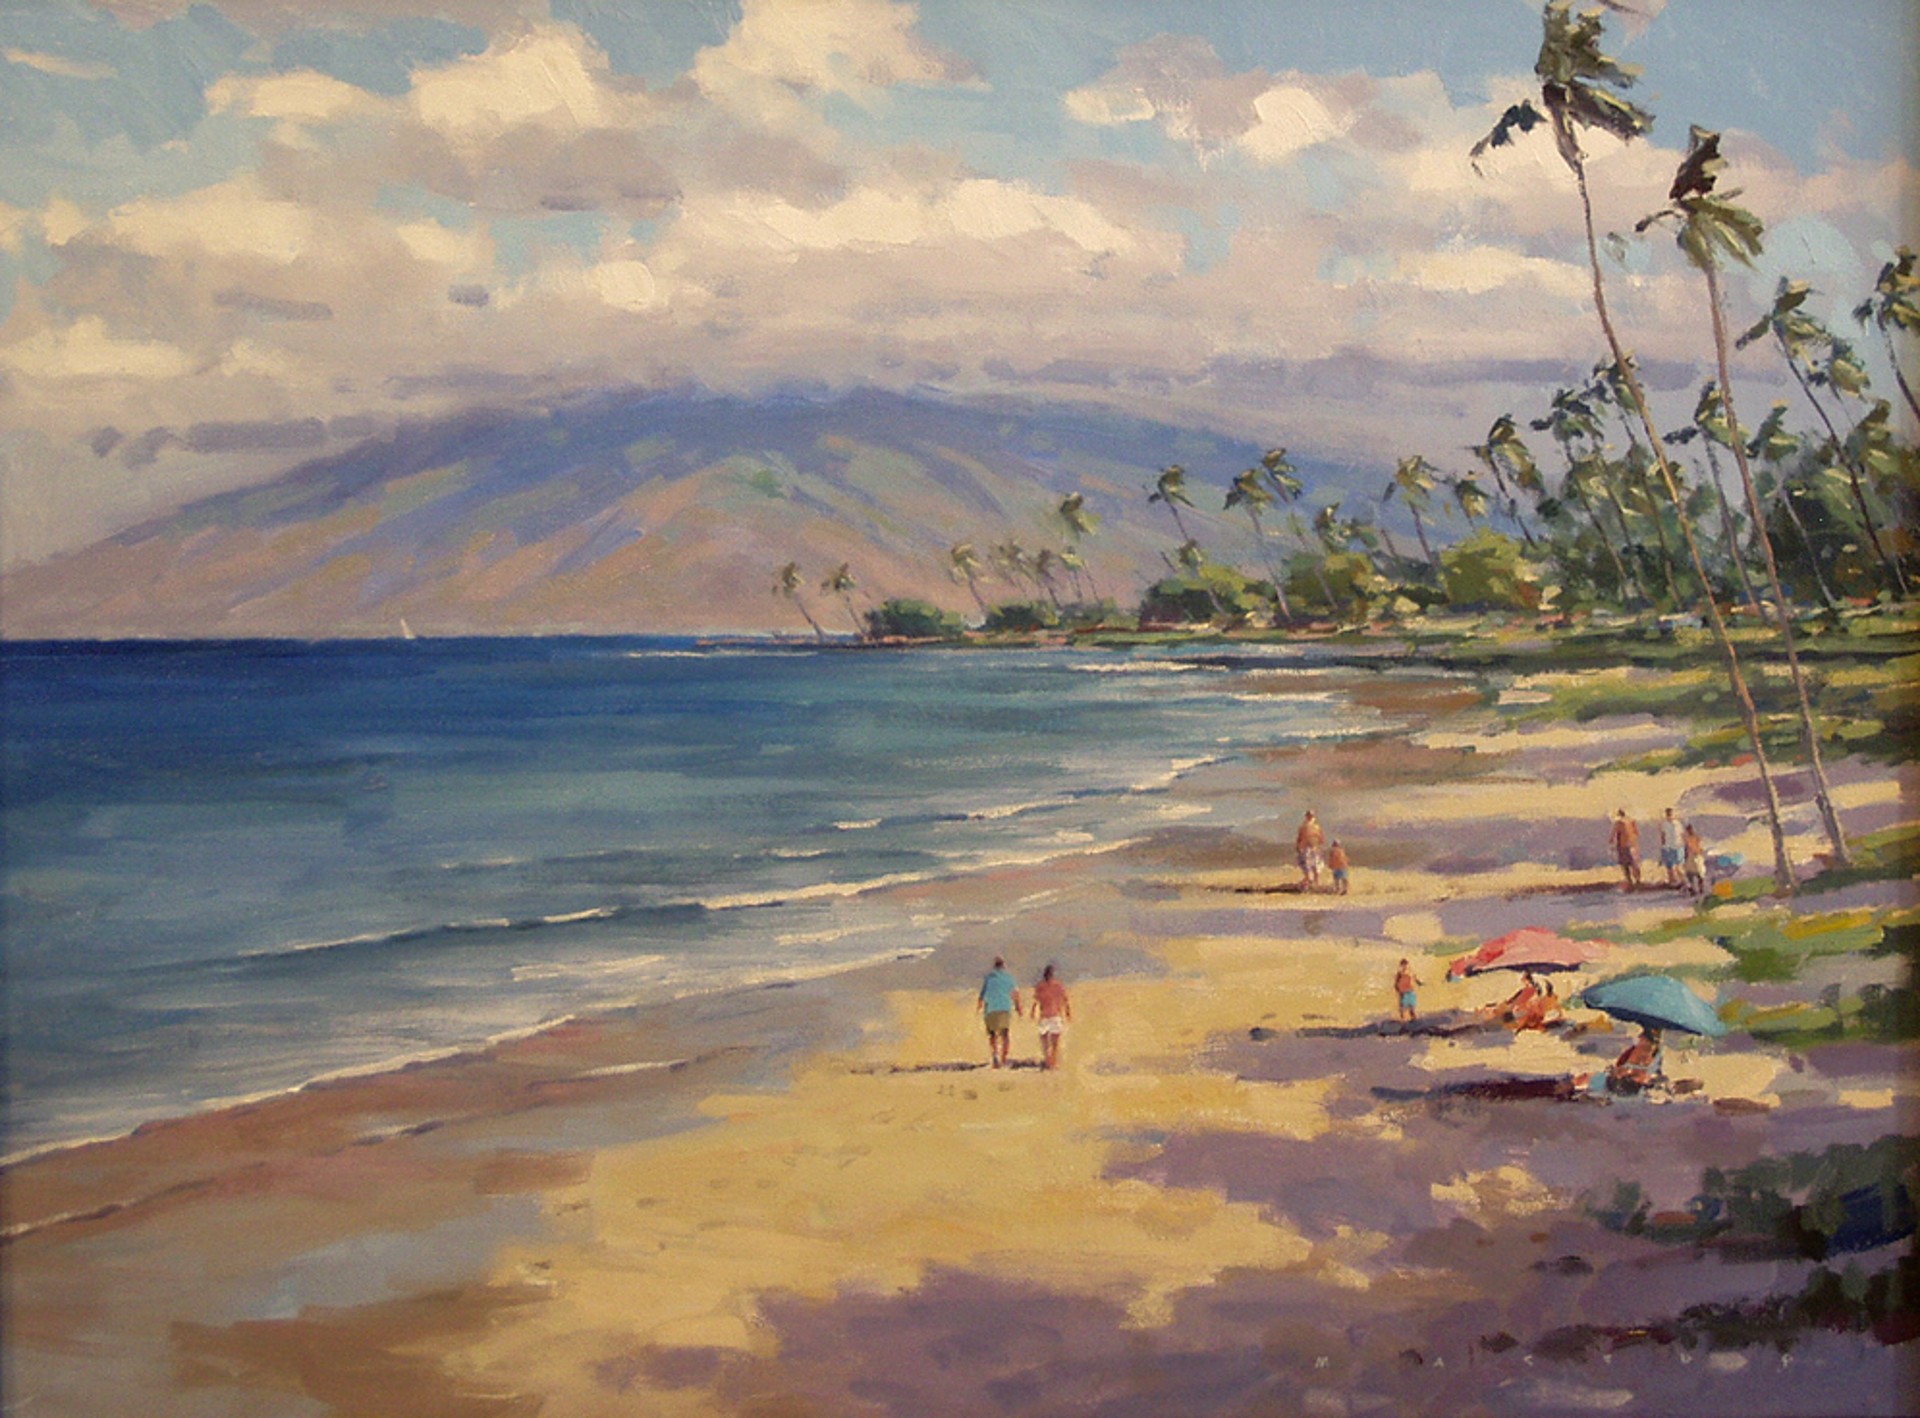 Private Commission - Maui - SOLD by Commission Possibilities / Previously Sold ZX